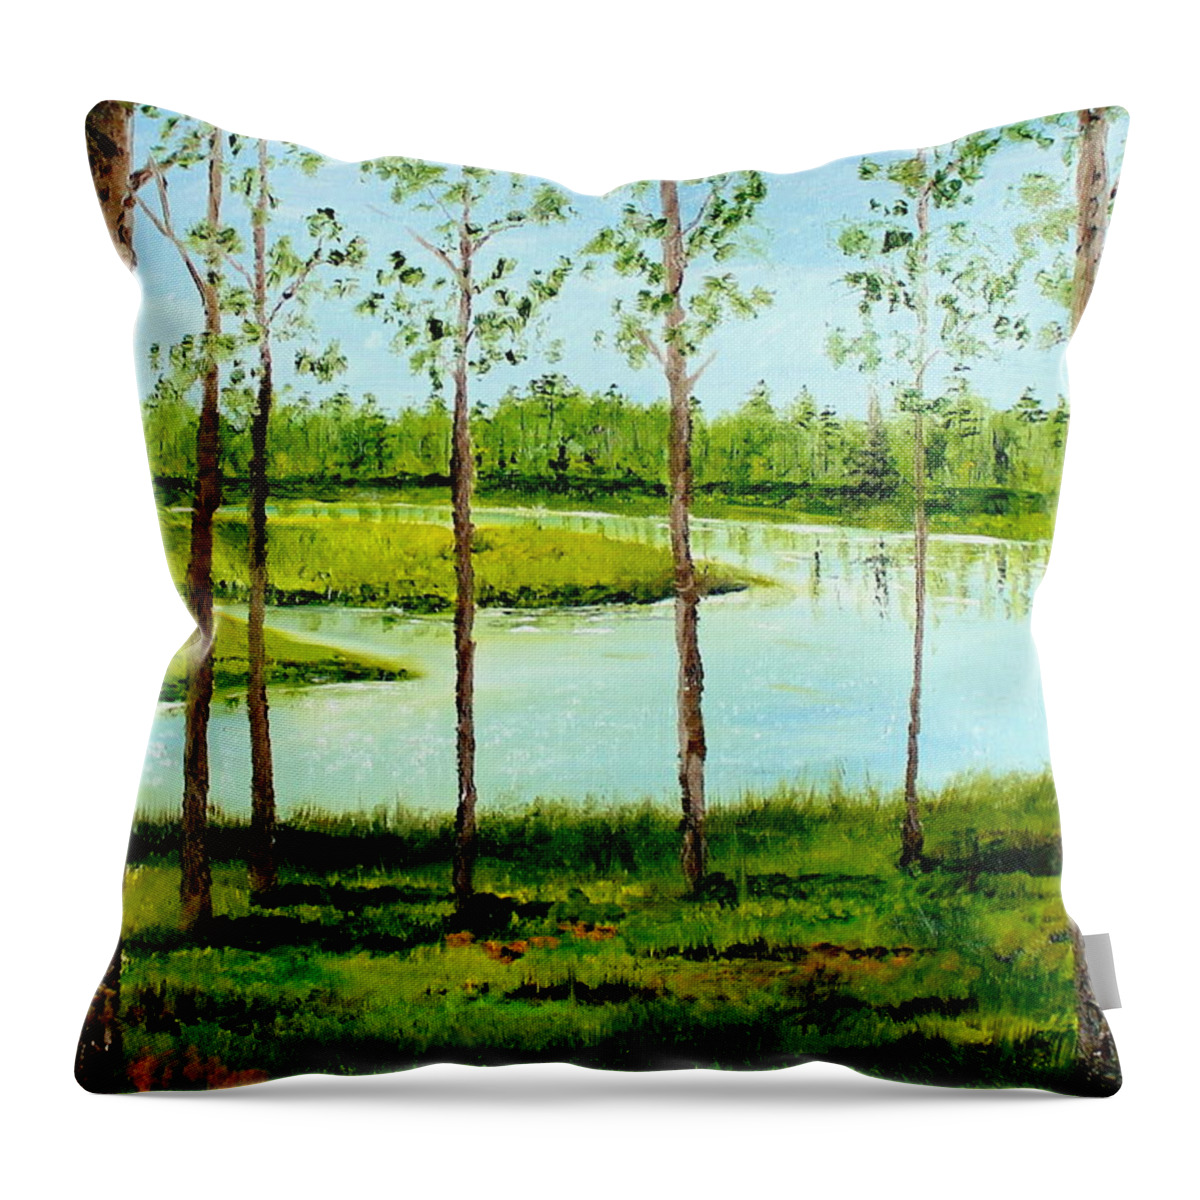 Faver Throw Pillow featuring the painting Faver Dykes by Larry Whitler